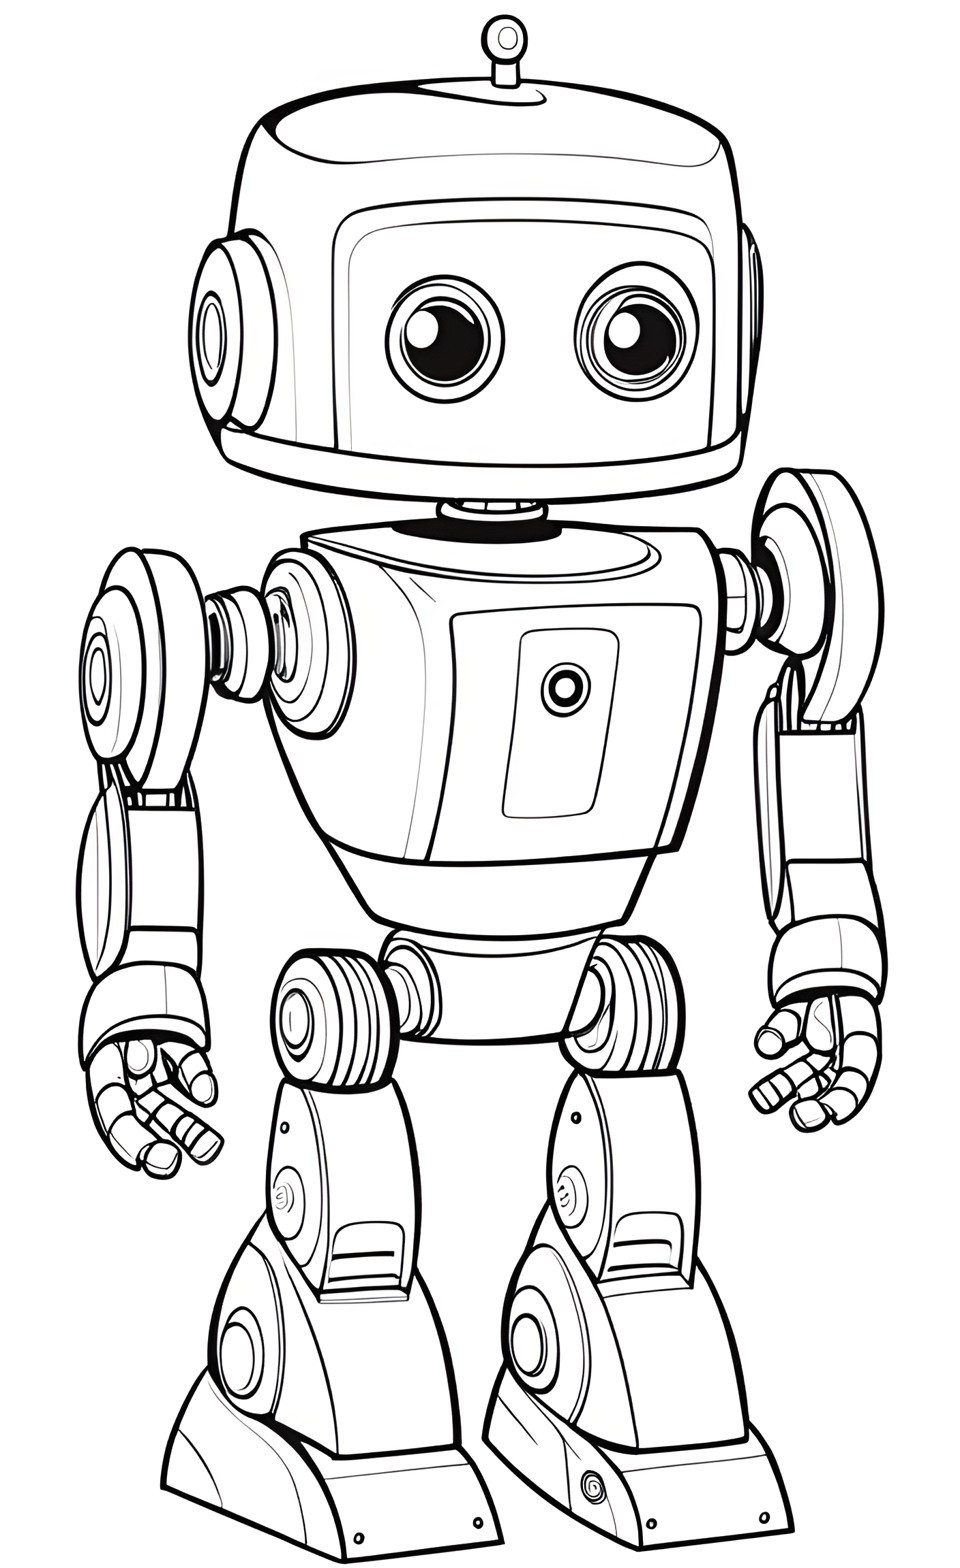 Simple Robot coloring pages for kids